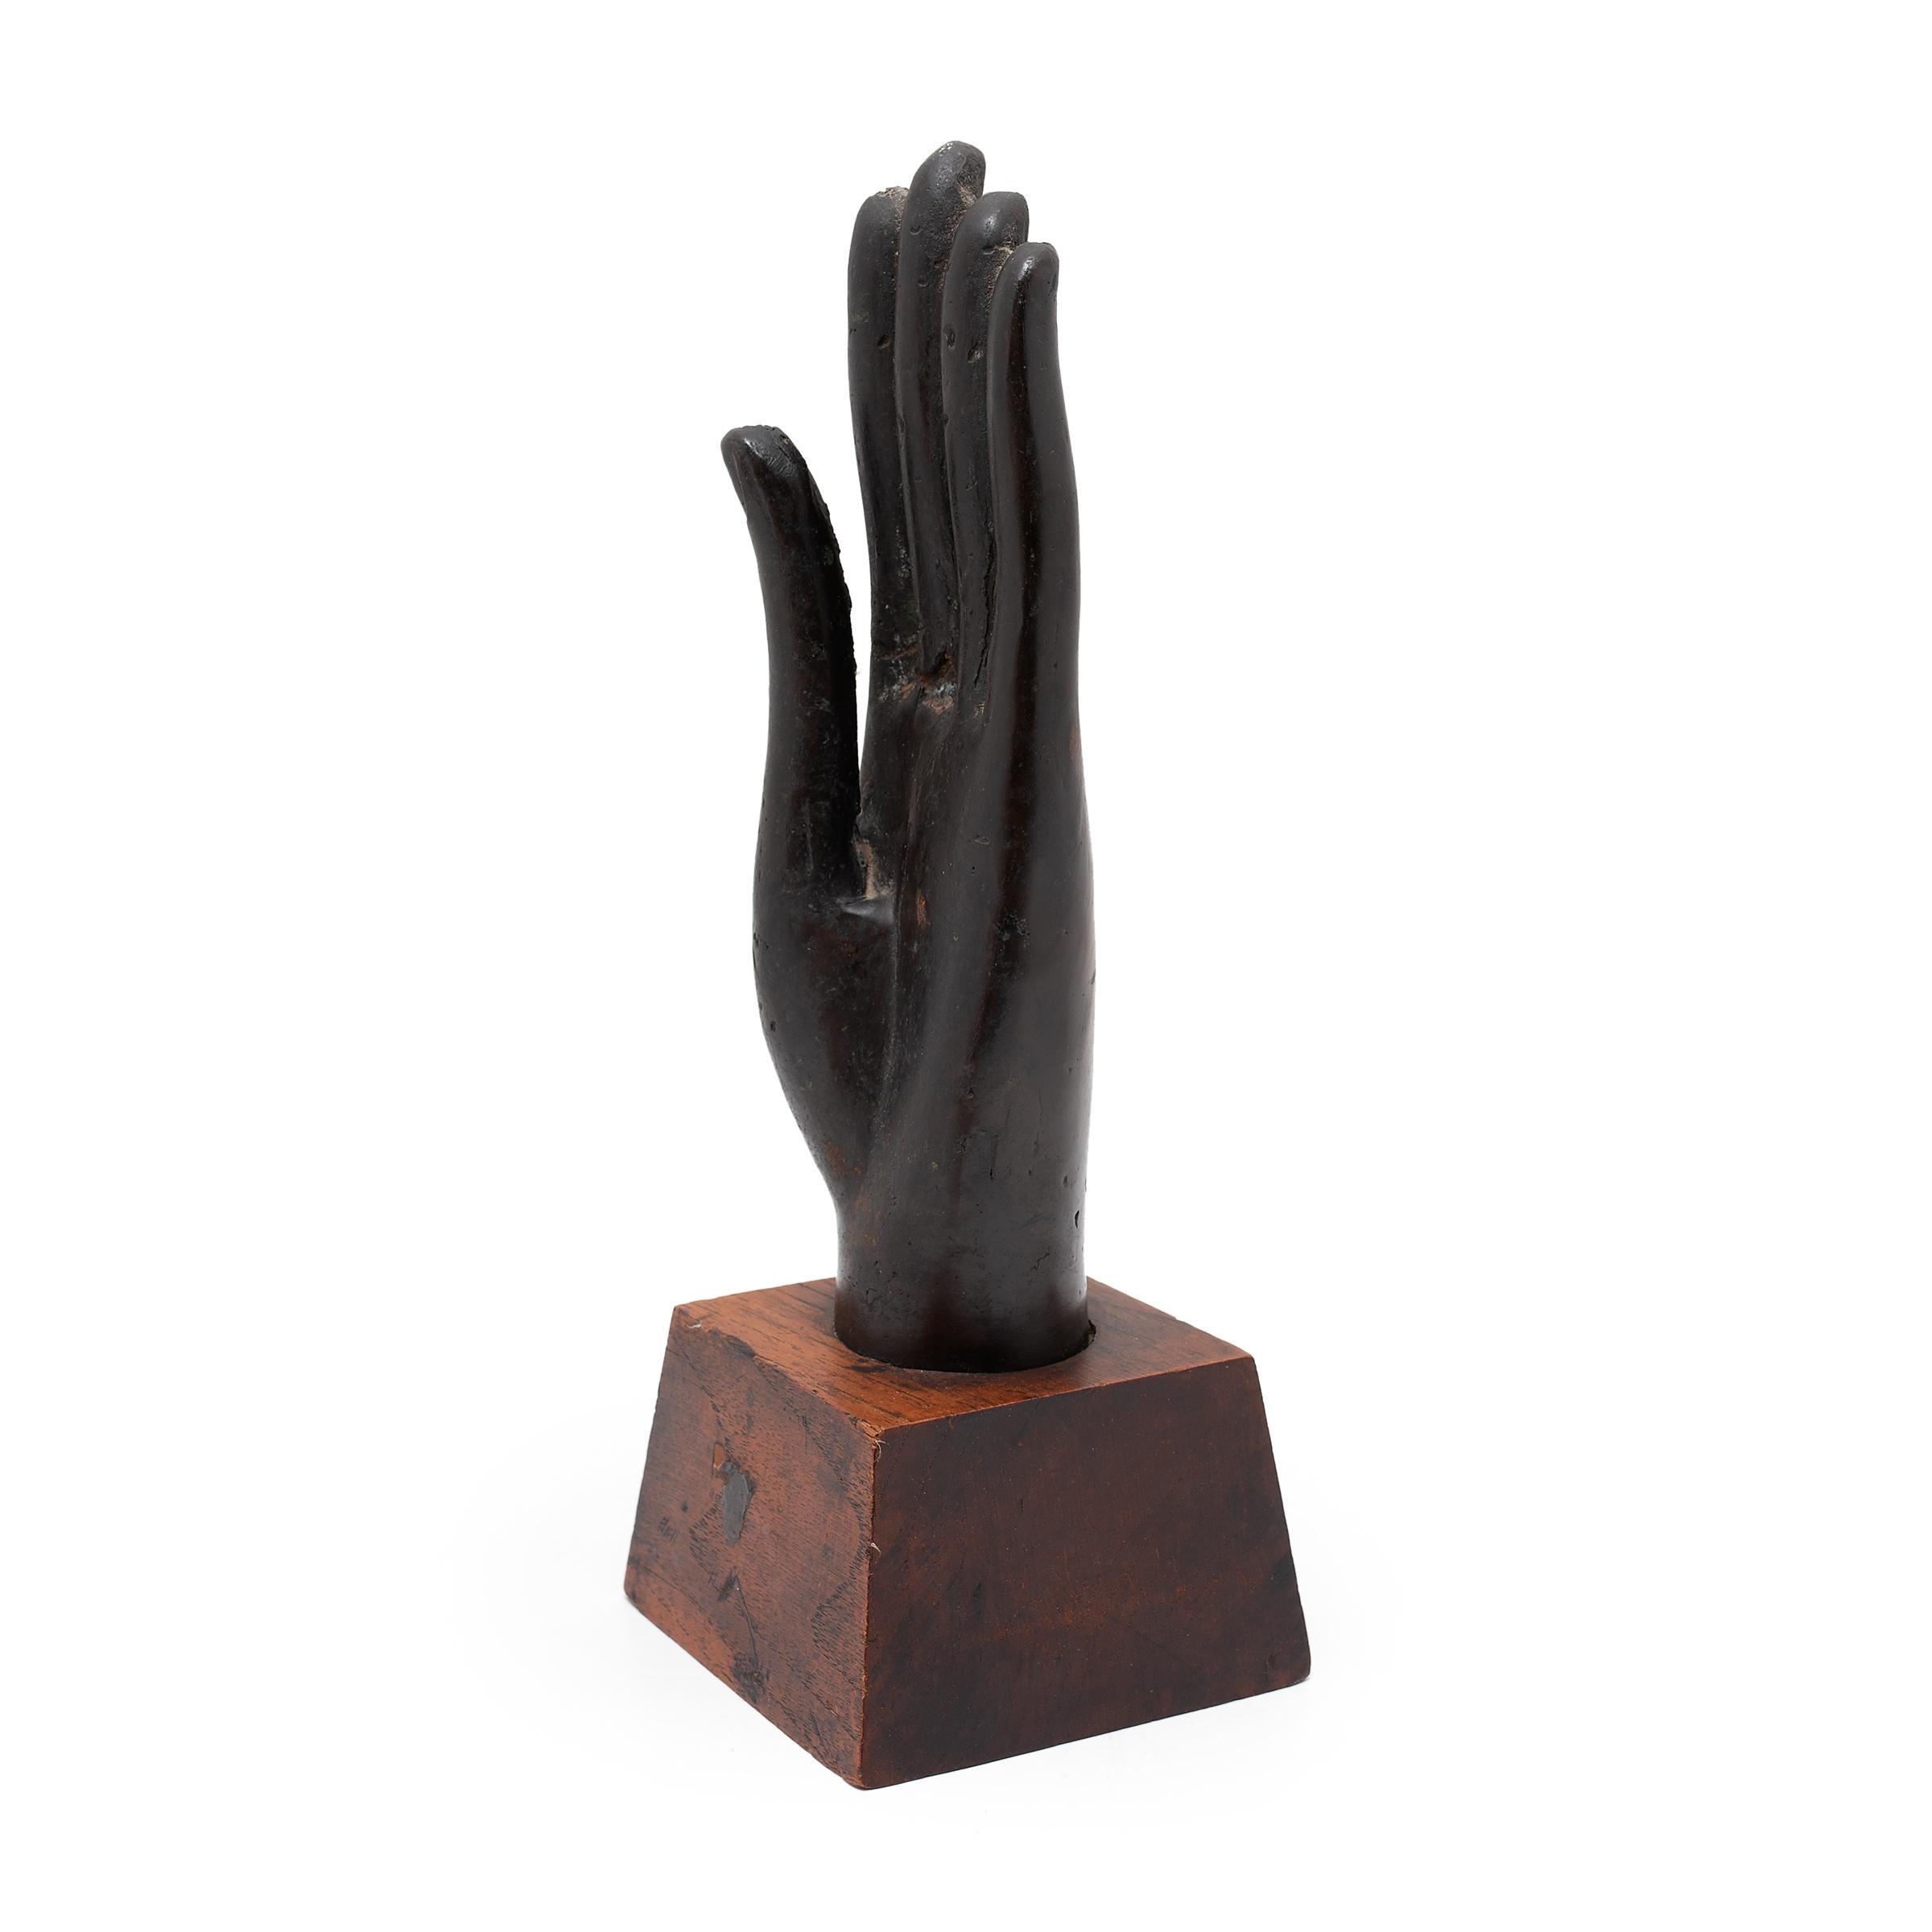 This 19th-century Buddha's hand sculpture from Thailand is finely cast of bronze with lifelike features and a beautiful dark patina. The hand is held upwards in abhaya mudra, the gesture of protection and reassurance. With arms outstretched and